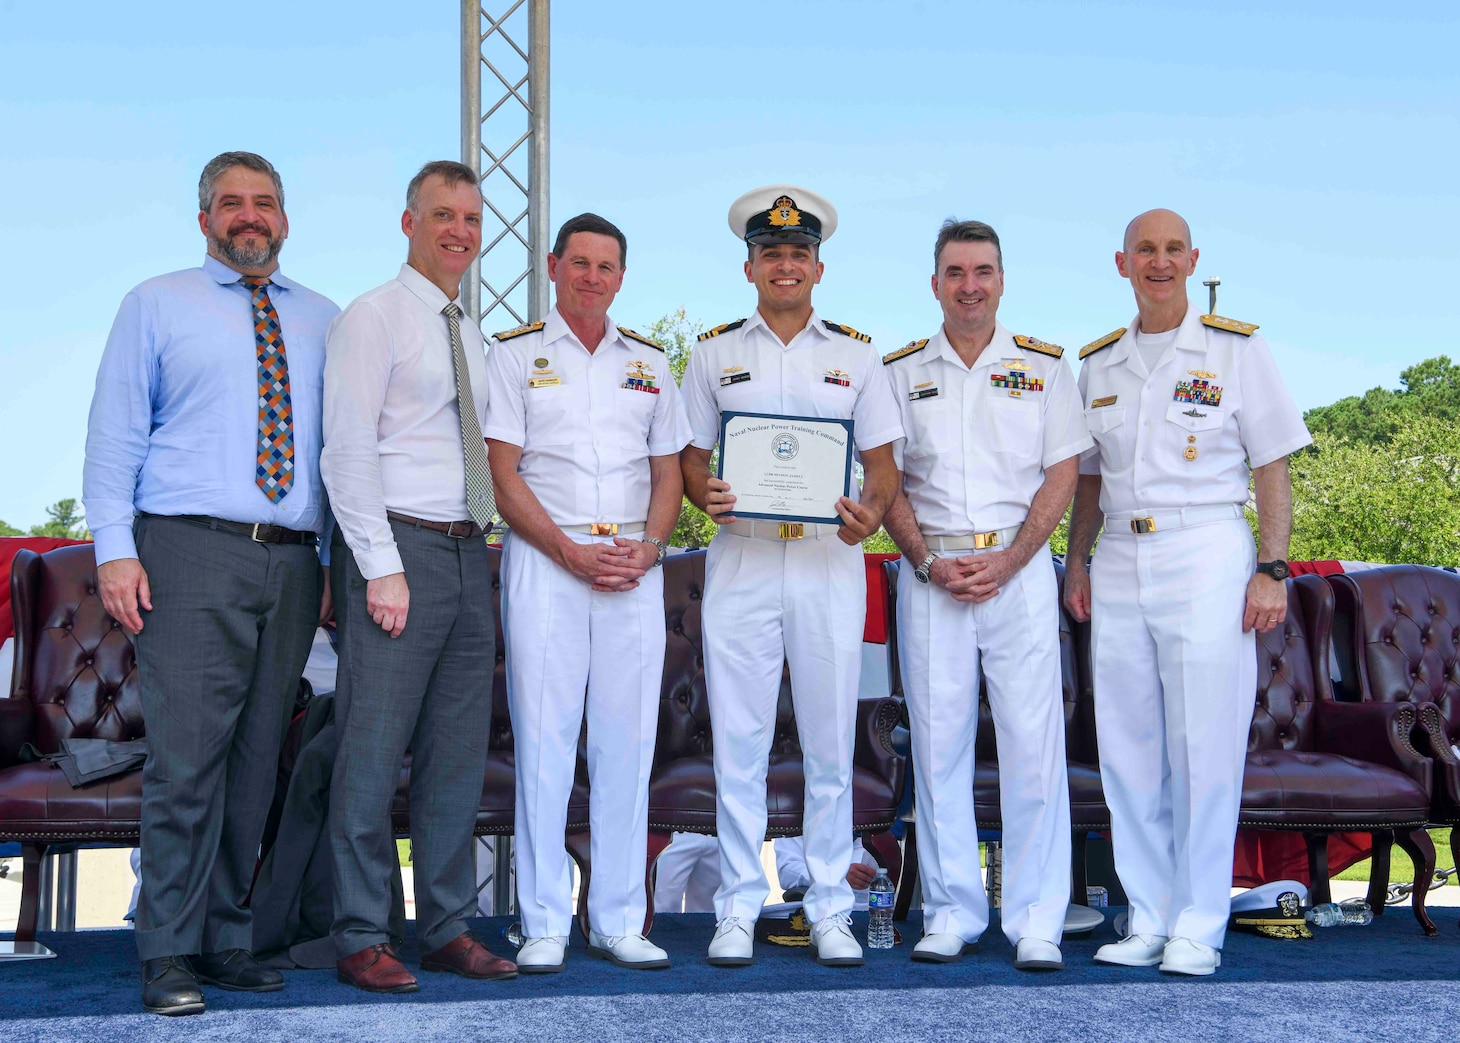 Adm. James F. Caldwell Jr., director, Naval Nuclear Propulsion Program, right, Royal Australian Navy Vice Adm. Jonathan Mead, director-general of the Australian Submarine Agency, Royal Australian Navy Lt. Cmdr James Heydon, Royal Australian Navy Vice Adm. Mark Hammond, Chief of Navy, the Honorable Erik Raven, Under Secretary of the Navy, and Abraham M. Denmark, Senior Advisor to the Secretary of Defense for AUKUS, pose for a photo during a United States Naval Nuclear Power School (NPS) graduation ceremony at Naval Nuclear Power Training Command (NNPTC), July 7, 2023. Three Royal Australian Navy (RAN) officers graduated NPS, marking a significant step in Australia's goal to operate conventionally-armed, nuclear-powered attack submarines (SSNs). (U.S. Navy photo by Mass Communication Specialist 2nd Class Dart D. De La Garza)